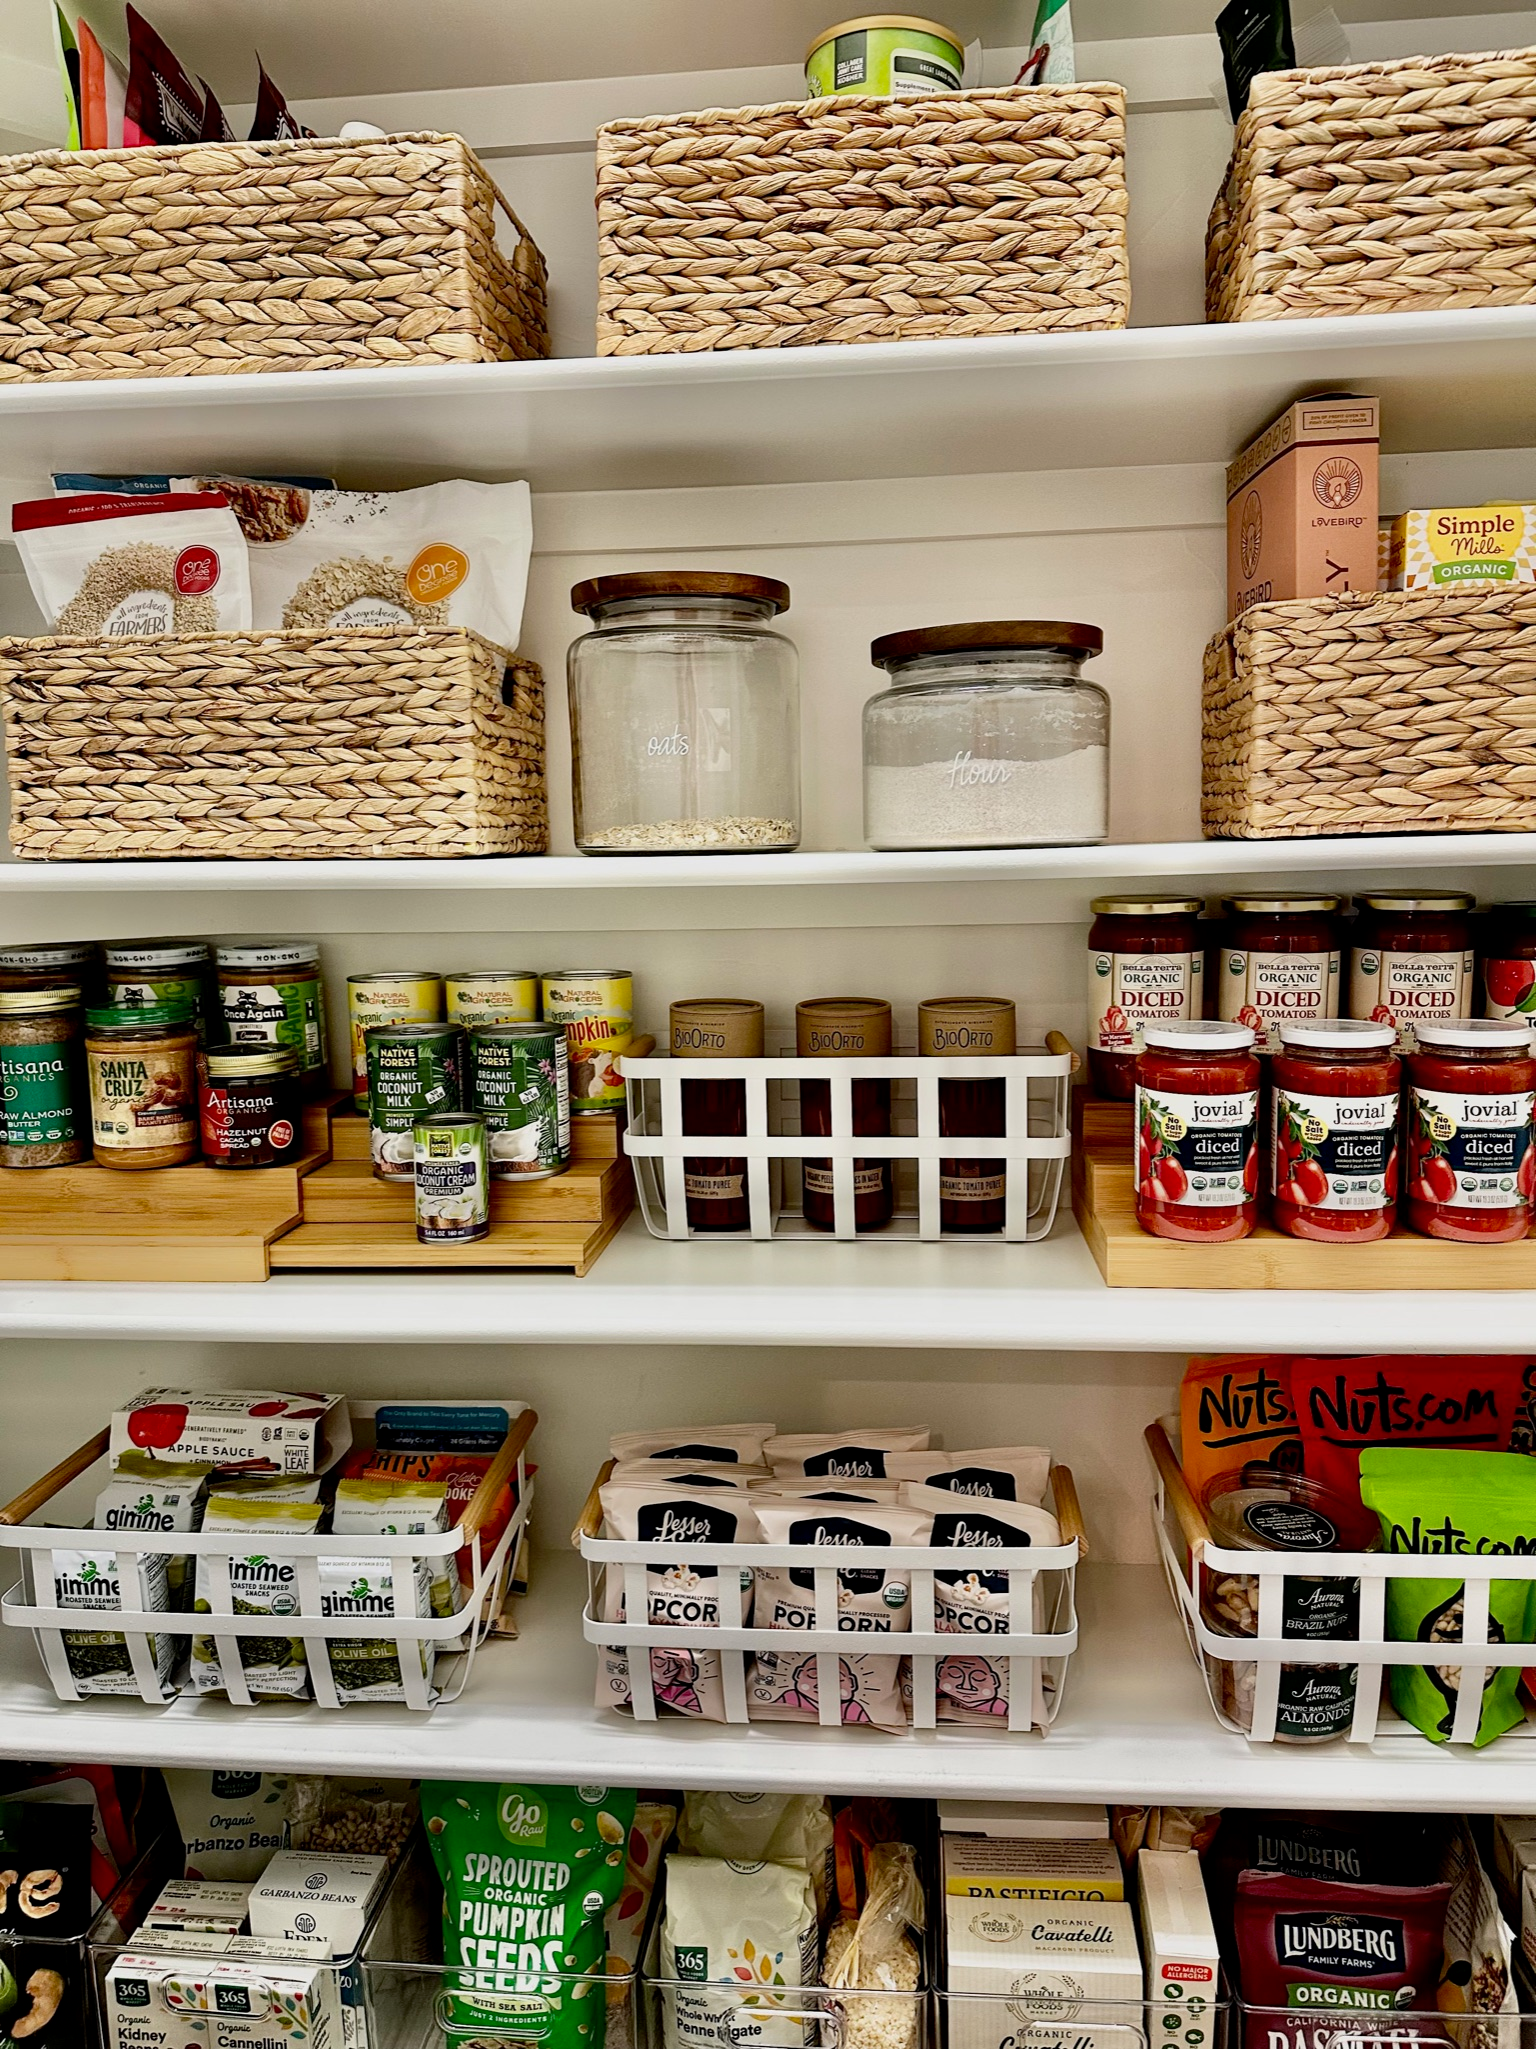 Scheduling regular cleanings for a well-maintained pantry